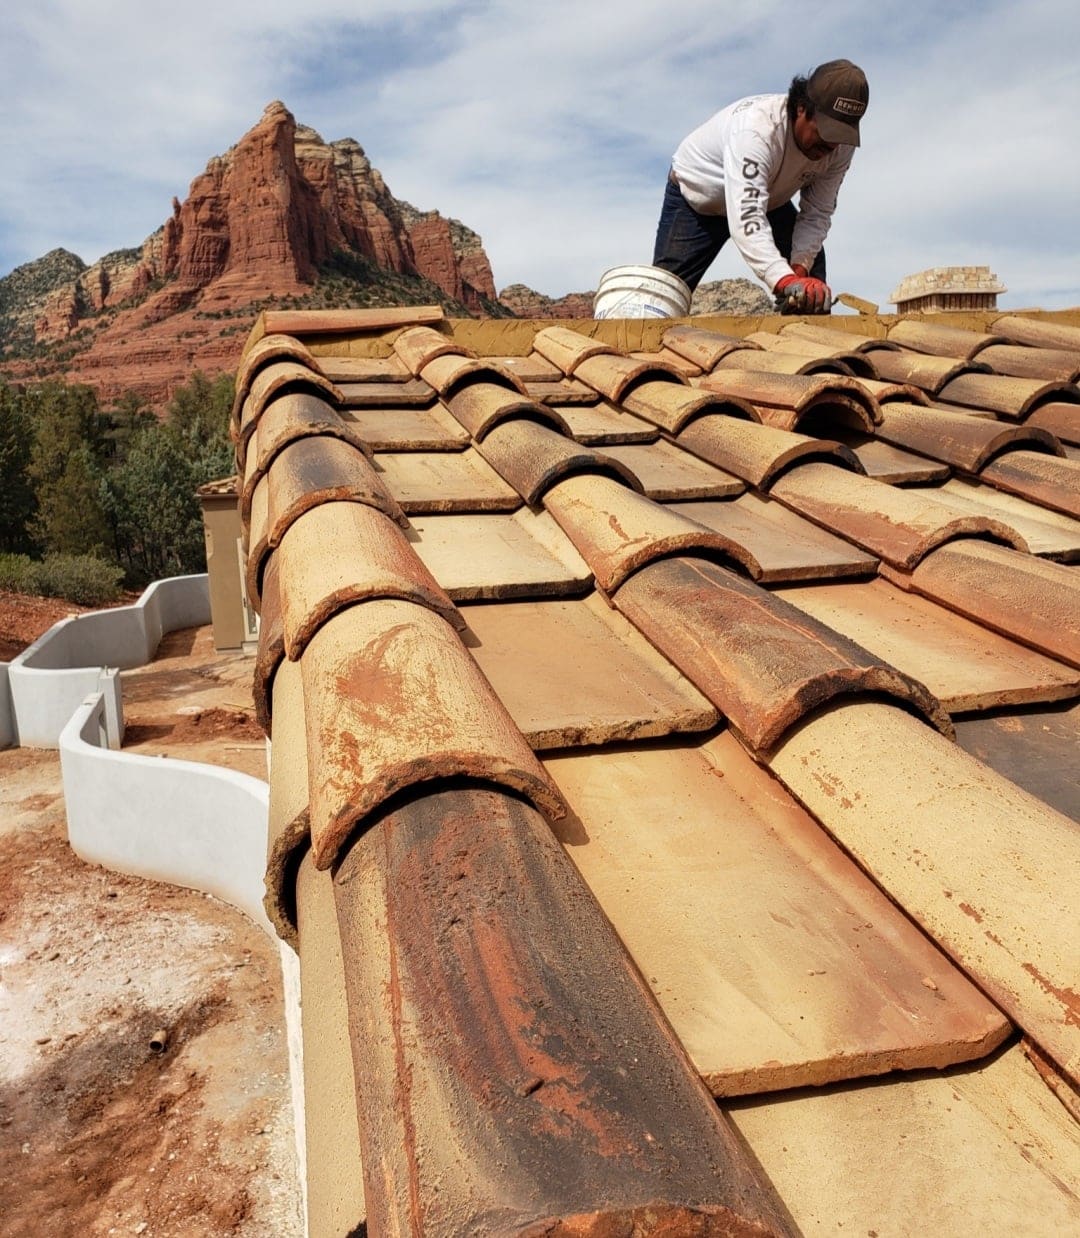 Behmer employee diligently setting tiles on a Scottsdale roof.